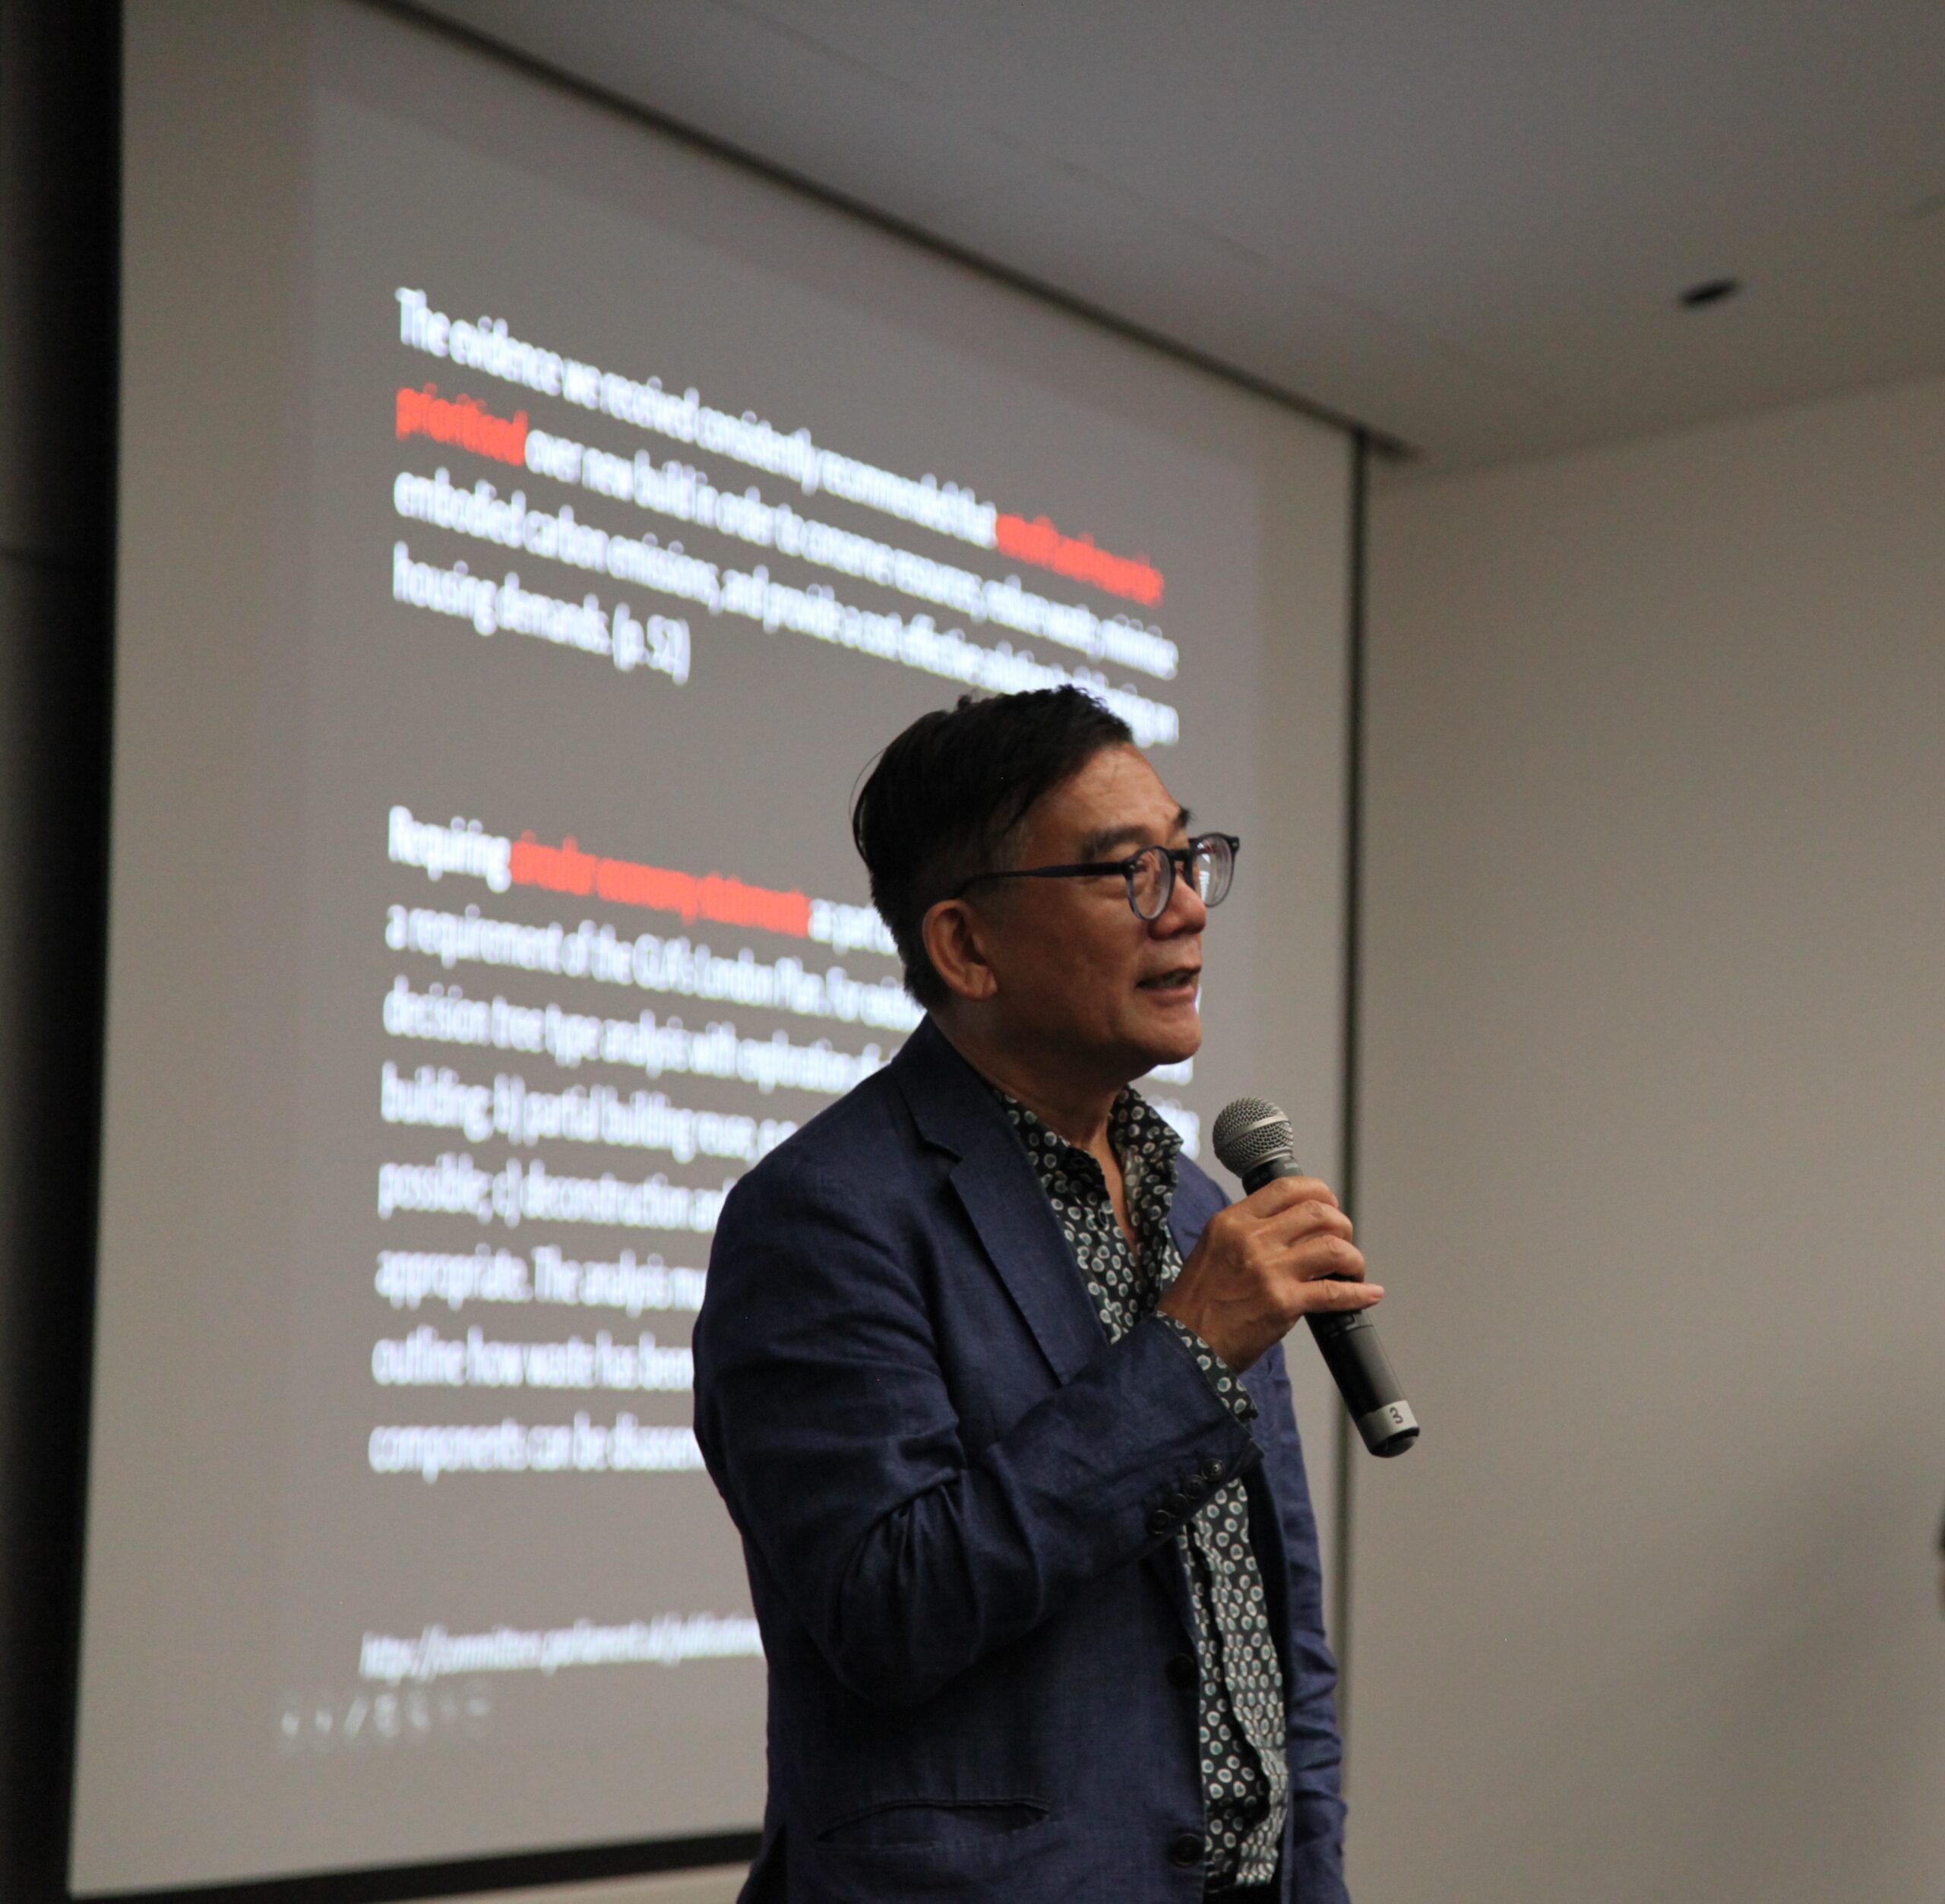 Professor Ho Puay Peng from CDE was one of the speakers at the symposium.